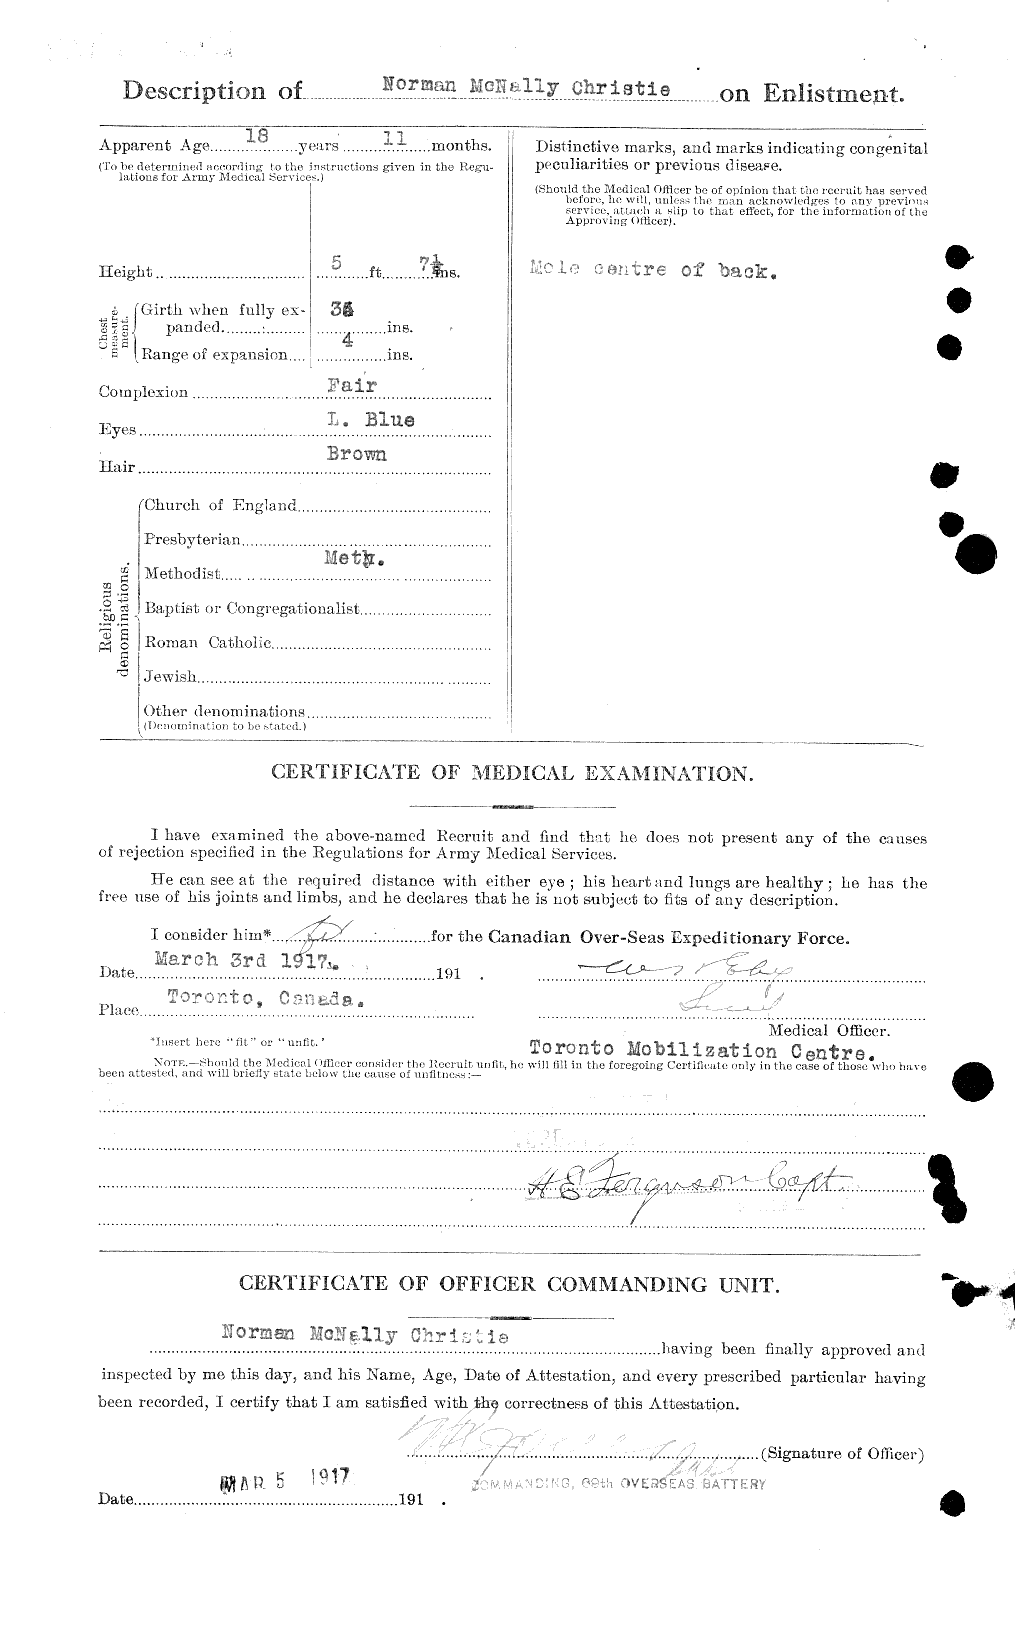 Personnel Records of the First World War - CEF 022039b